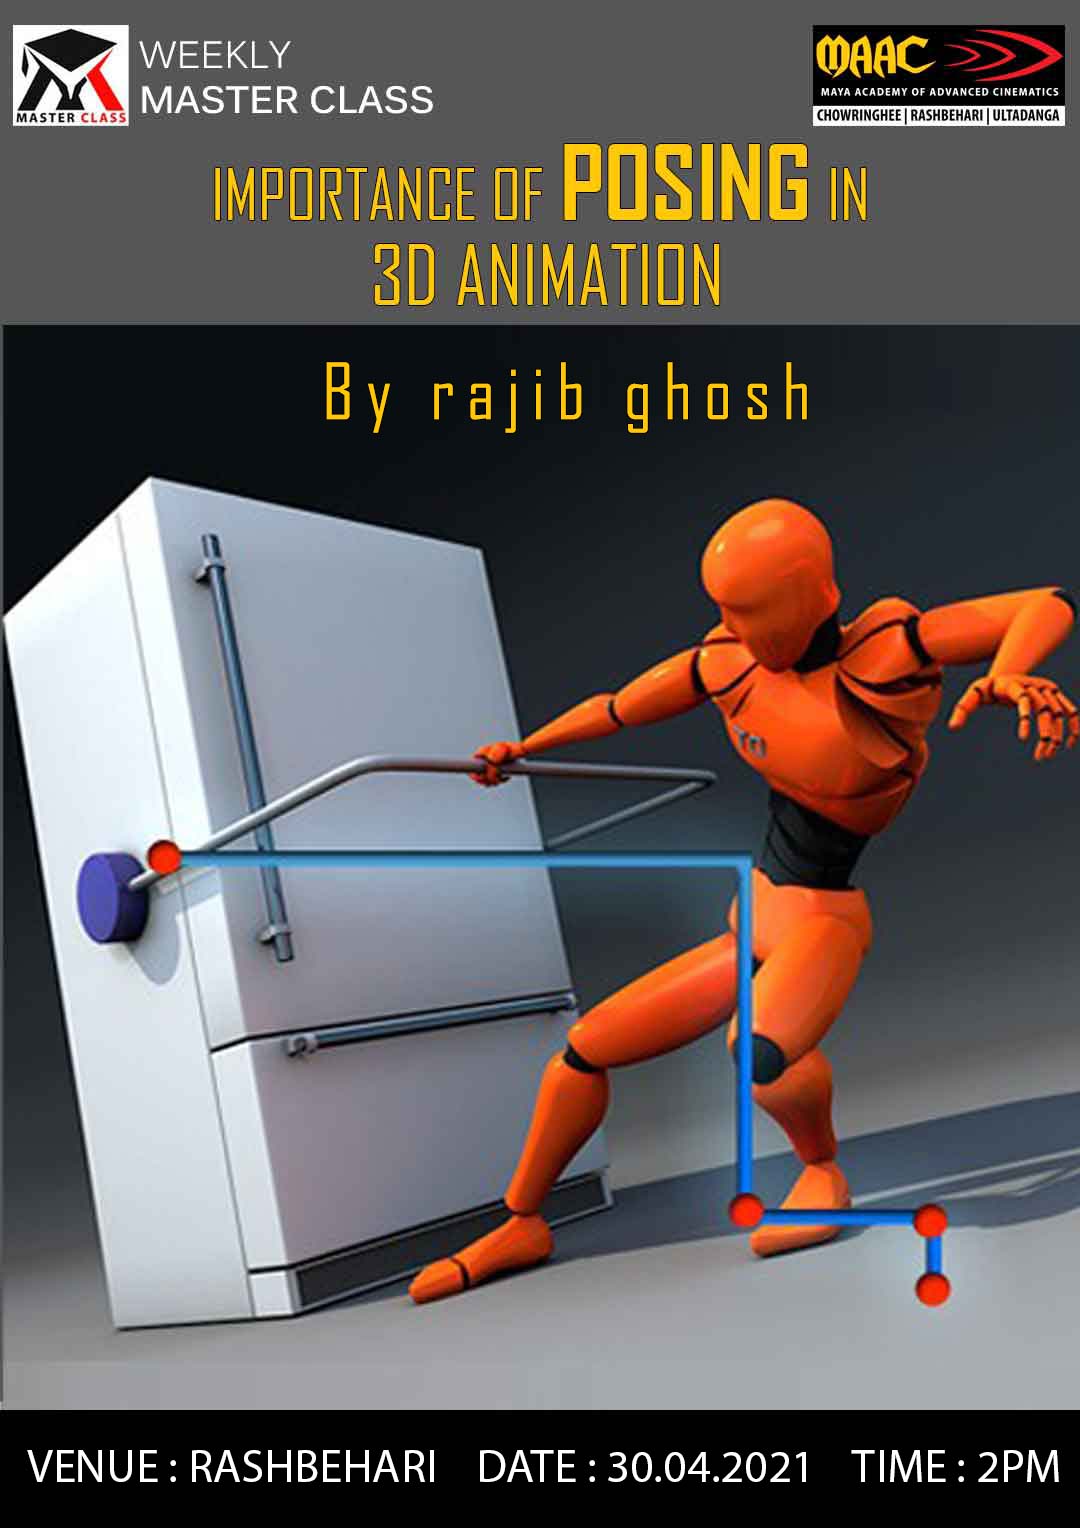 Weekly Master Class on Importance of Posing in 3D Animation